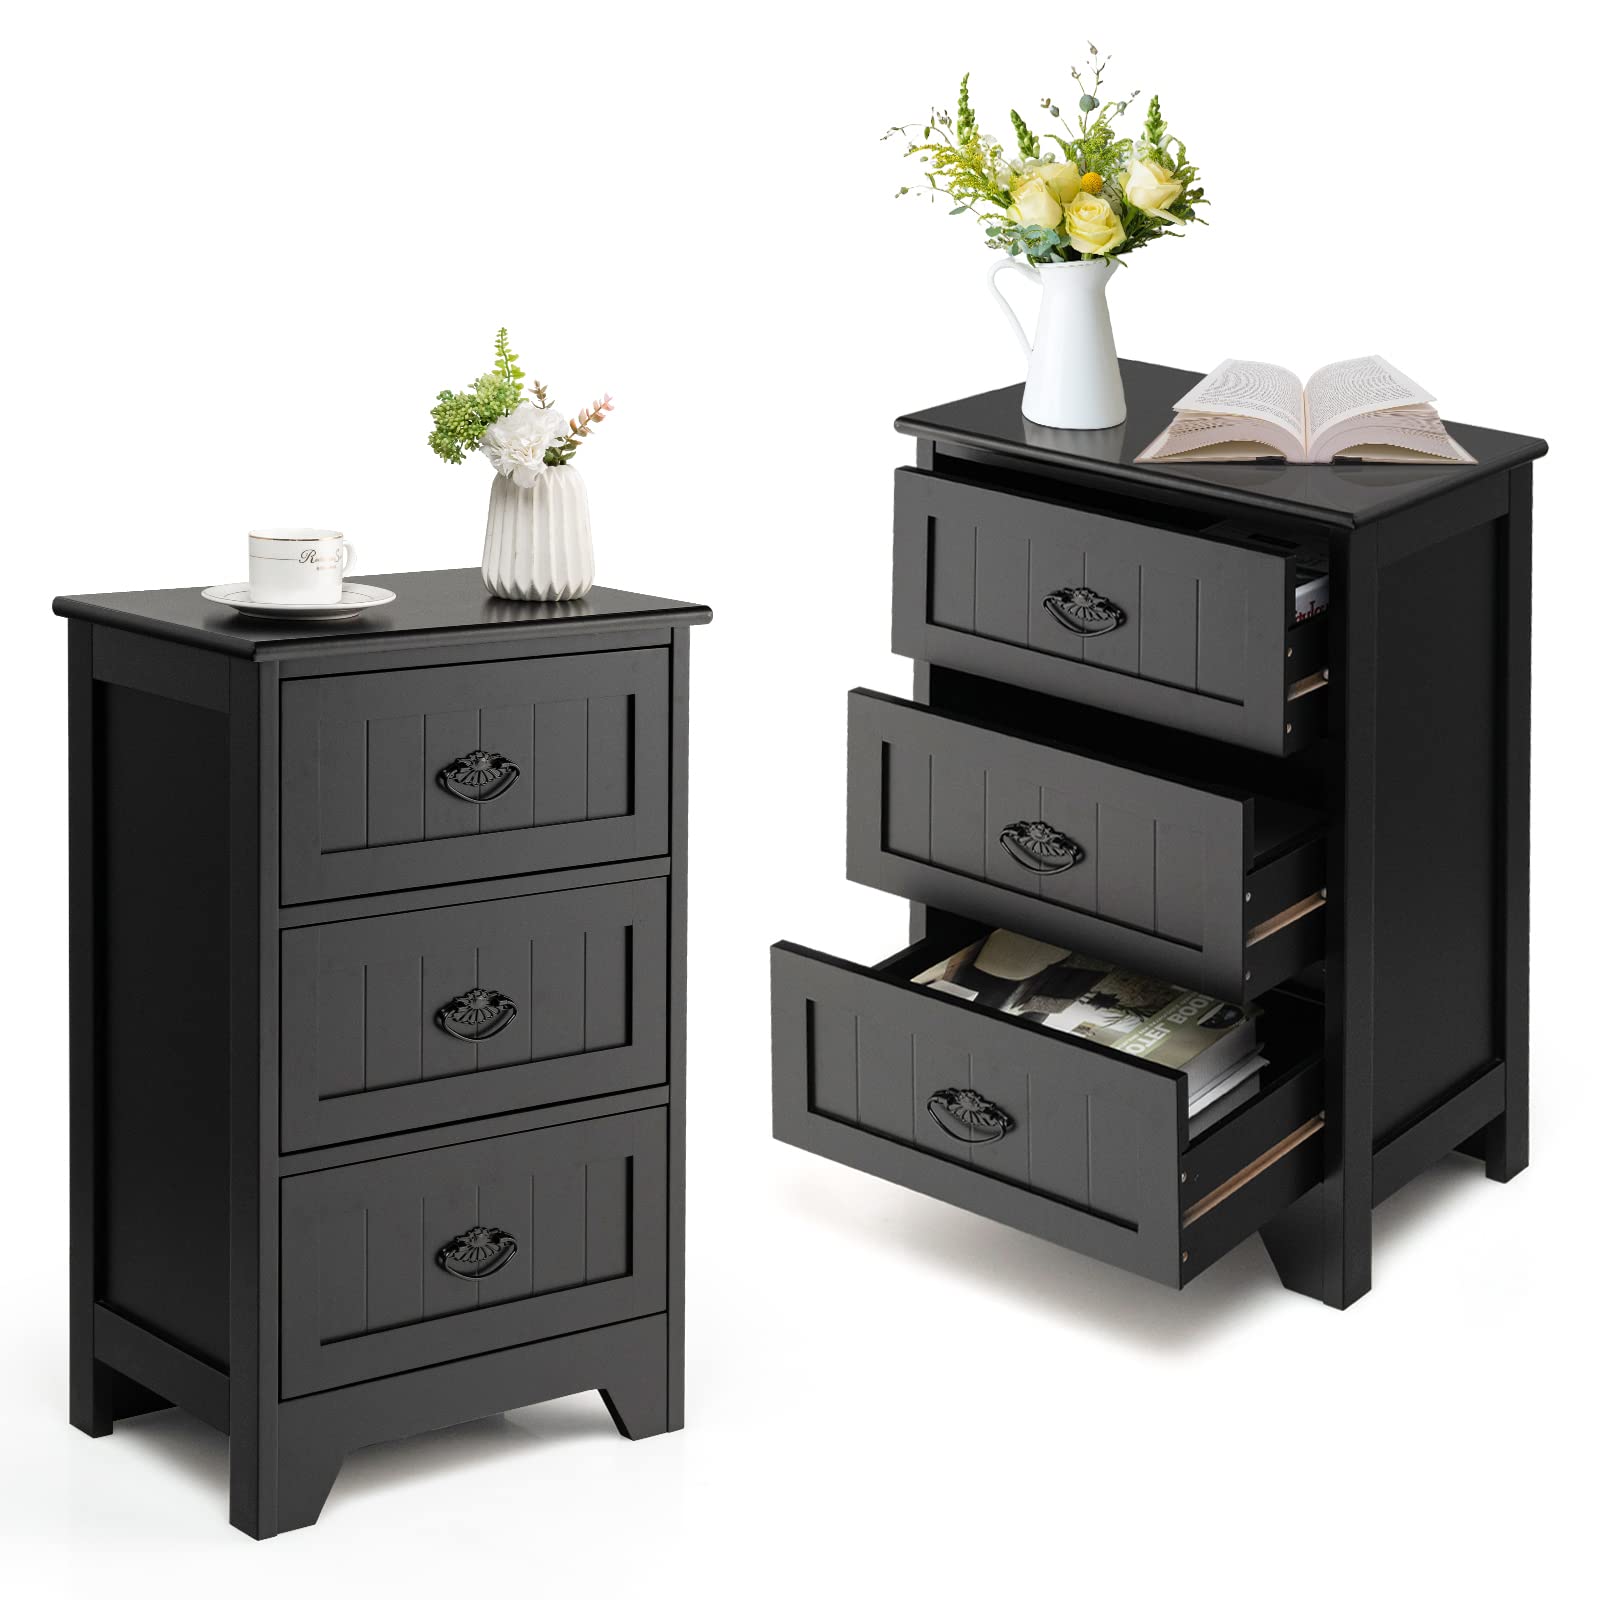 Giantex Nightstand with 3 Drawers, Bedside Table